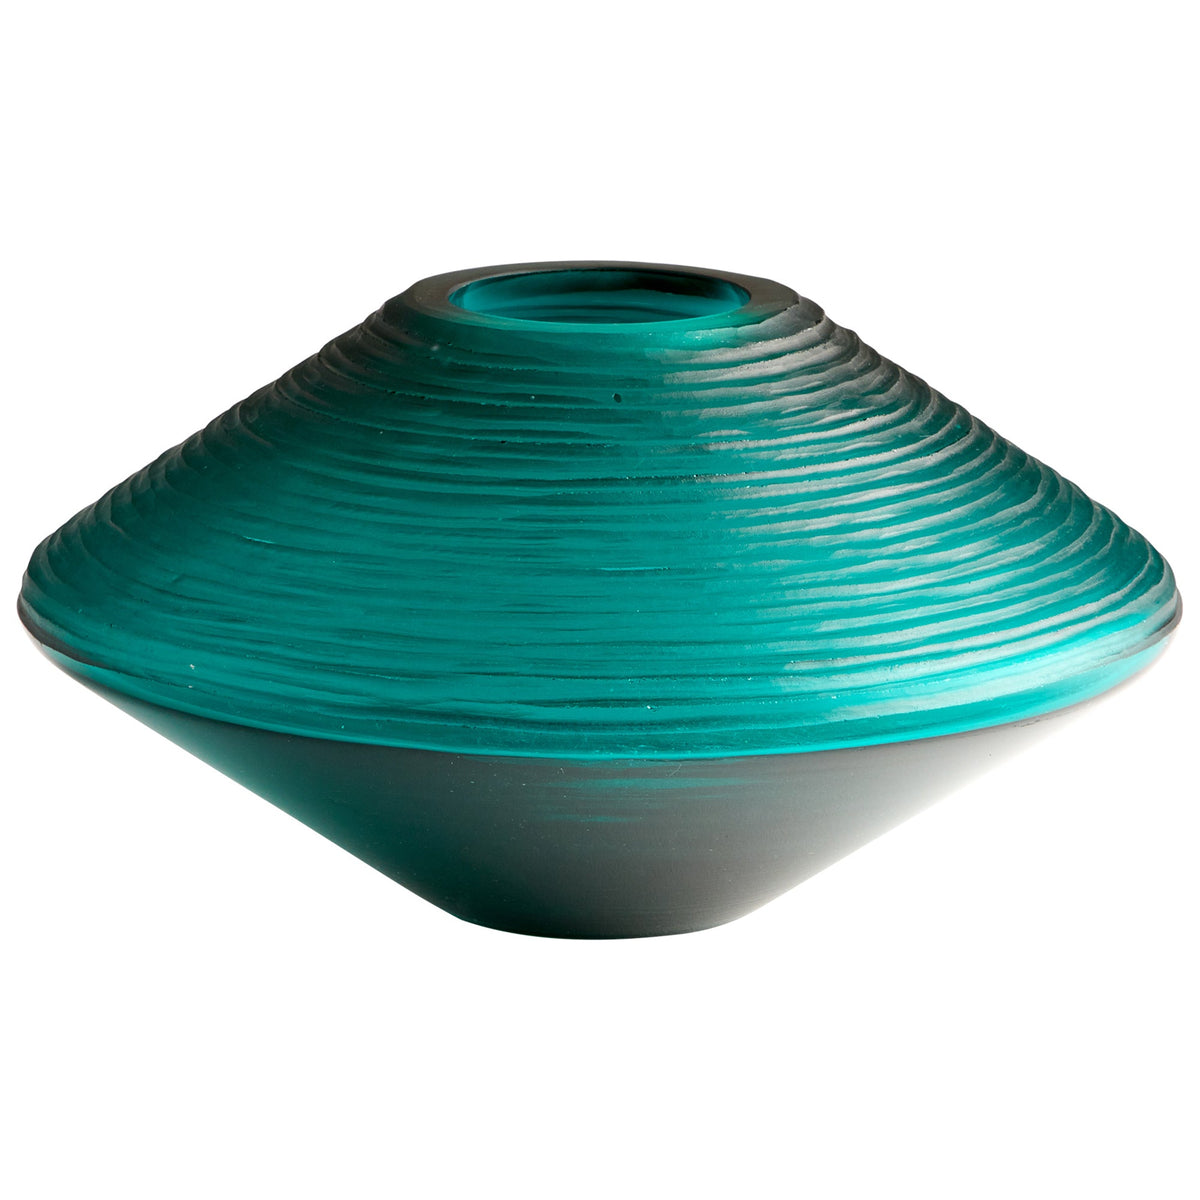 Pietro Vase|Green - Small by Cyan